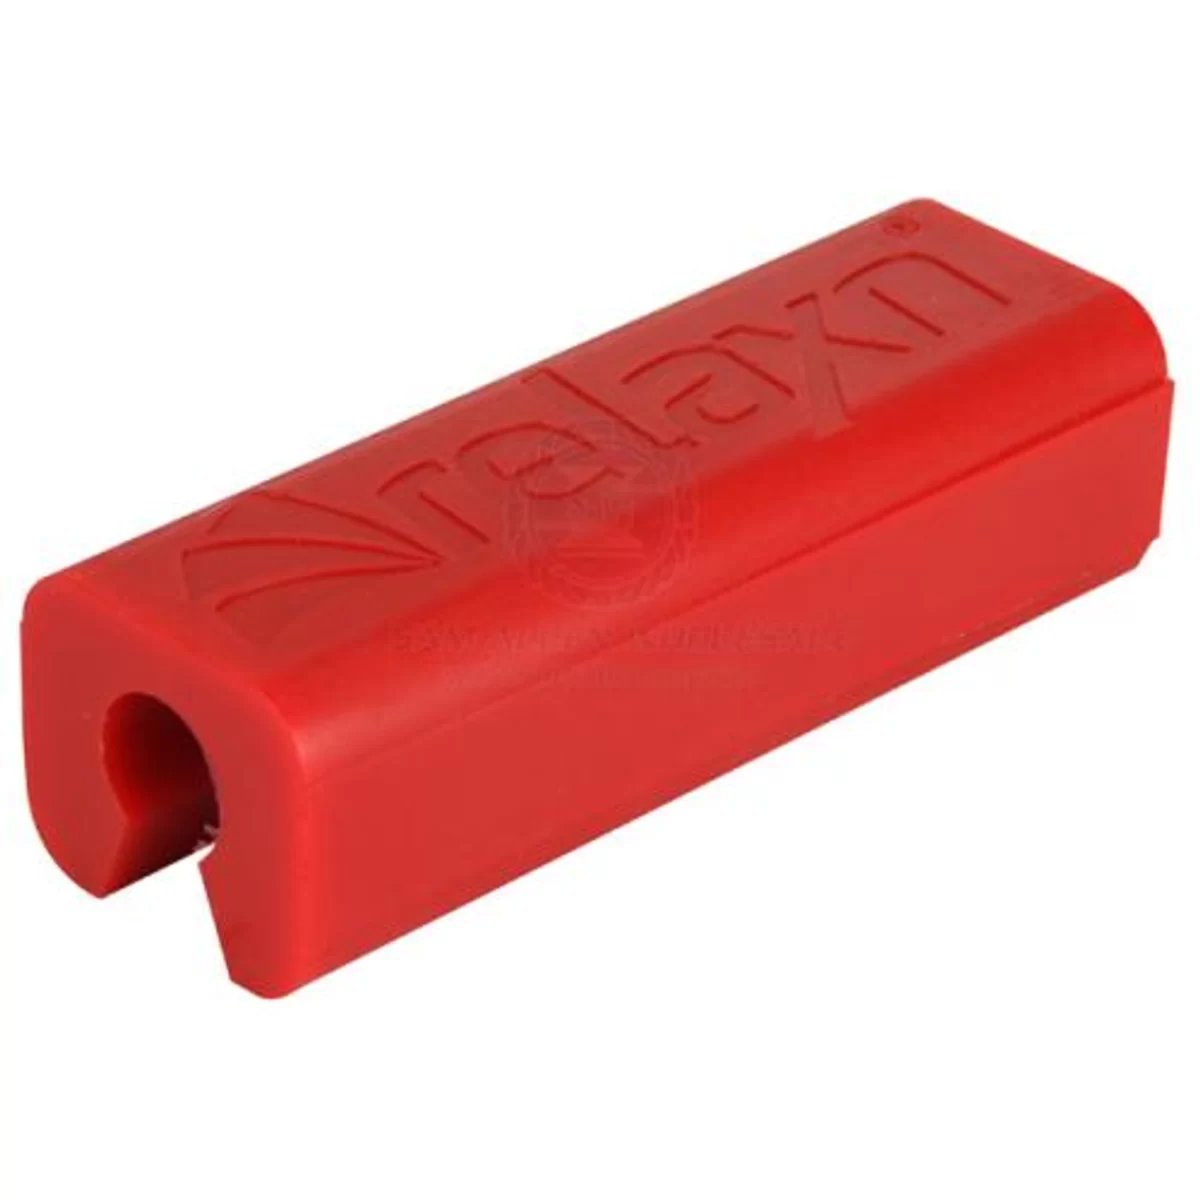 Relaxn Trim Tab Motor Support - Red